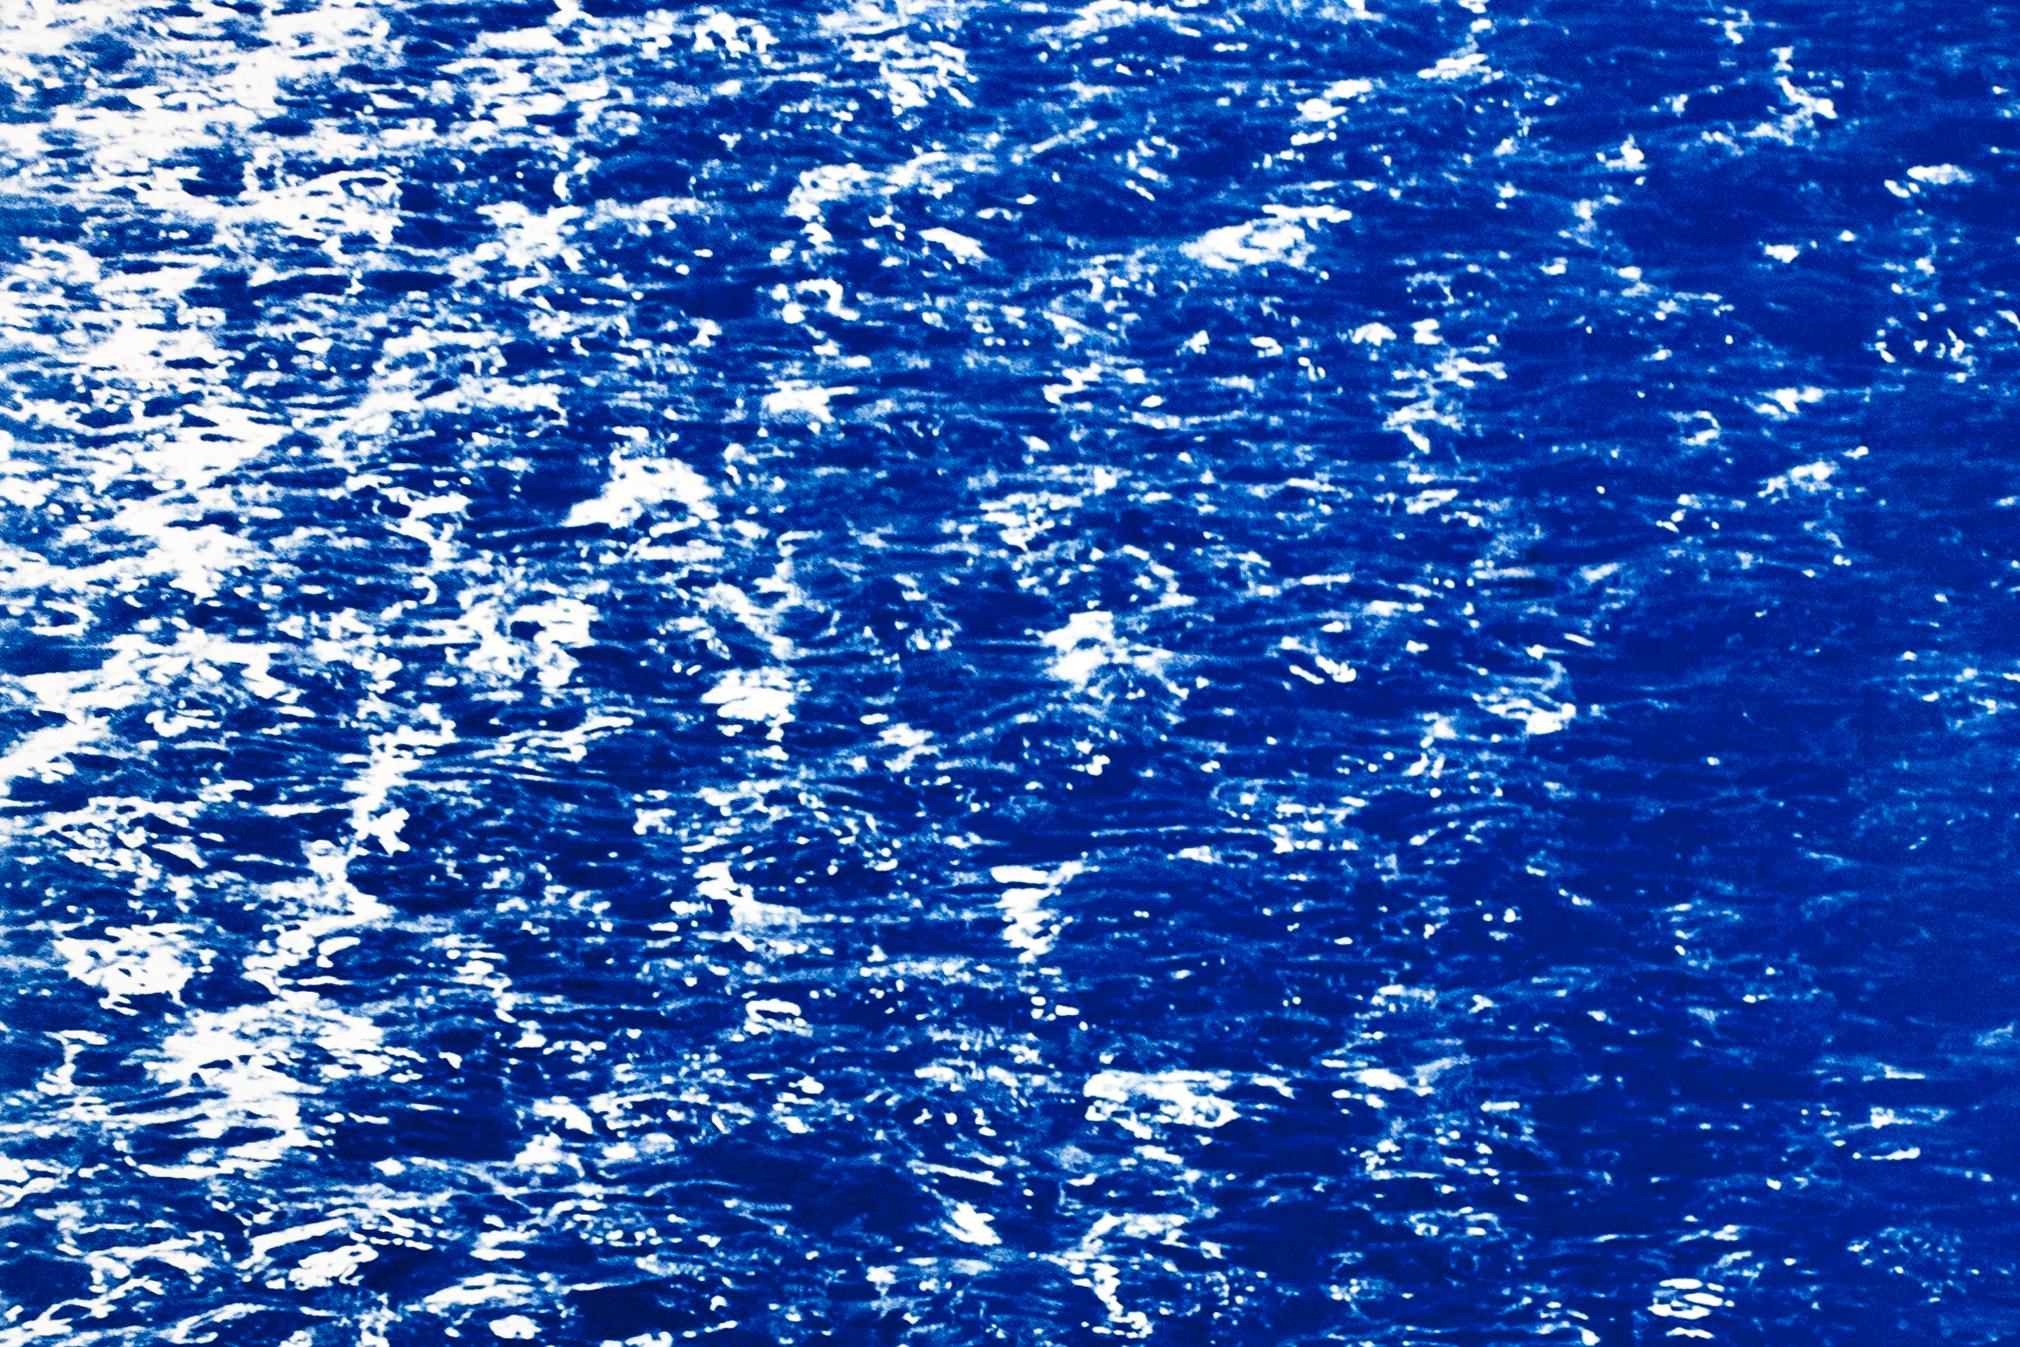 French Riviera Cove, Triptych, Cyanotype on Watercolor Paper, 100x210cm, Ocean 1